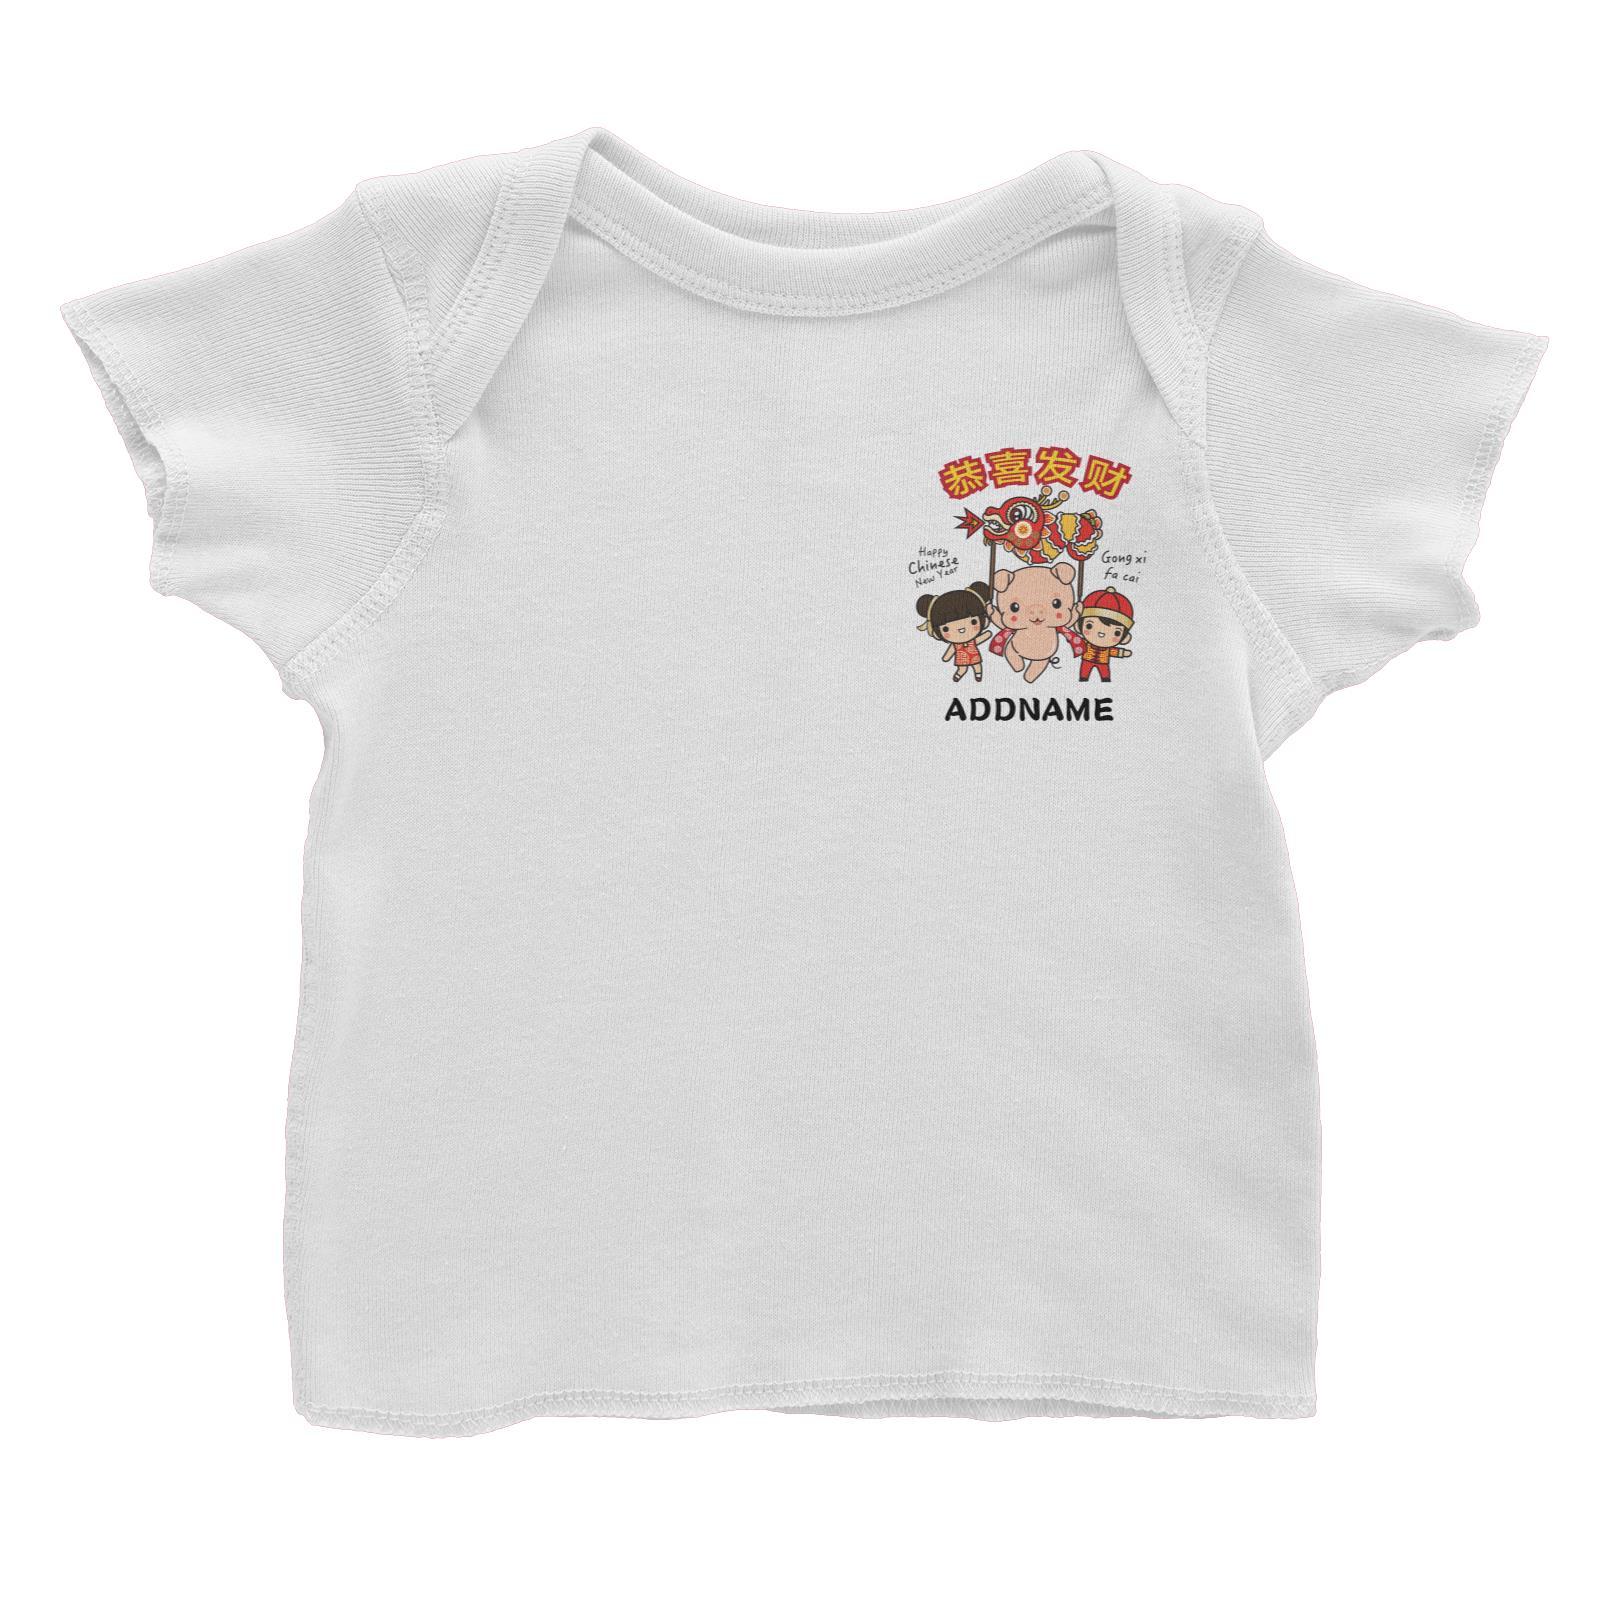 Prosperity Pig Boy, Girl and Baby Pig with Dragon Dance Pocket Design Baby T-Shirt